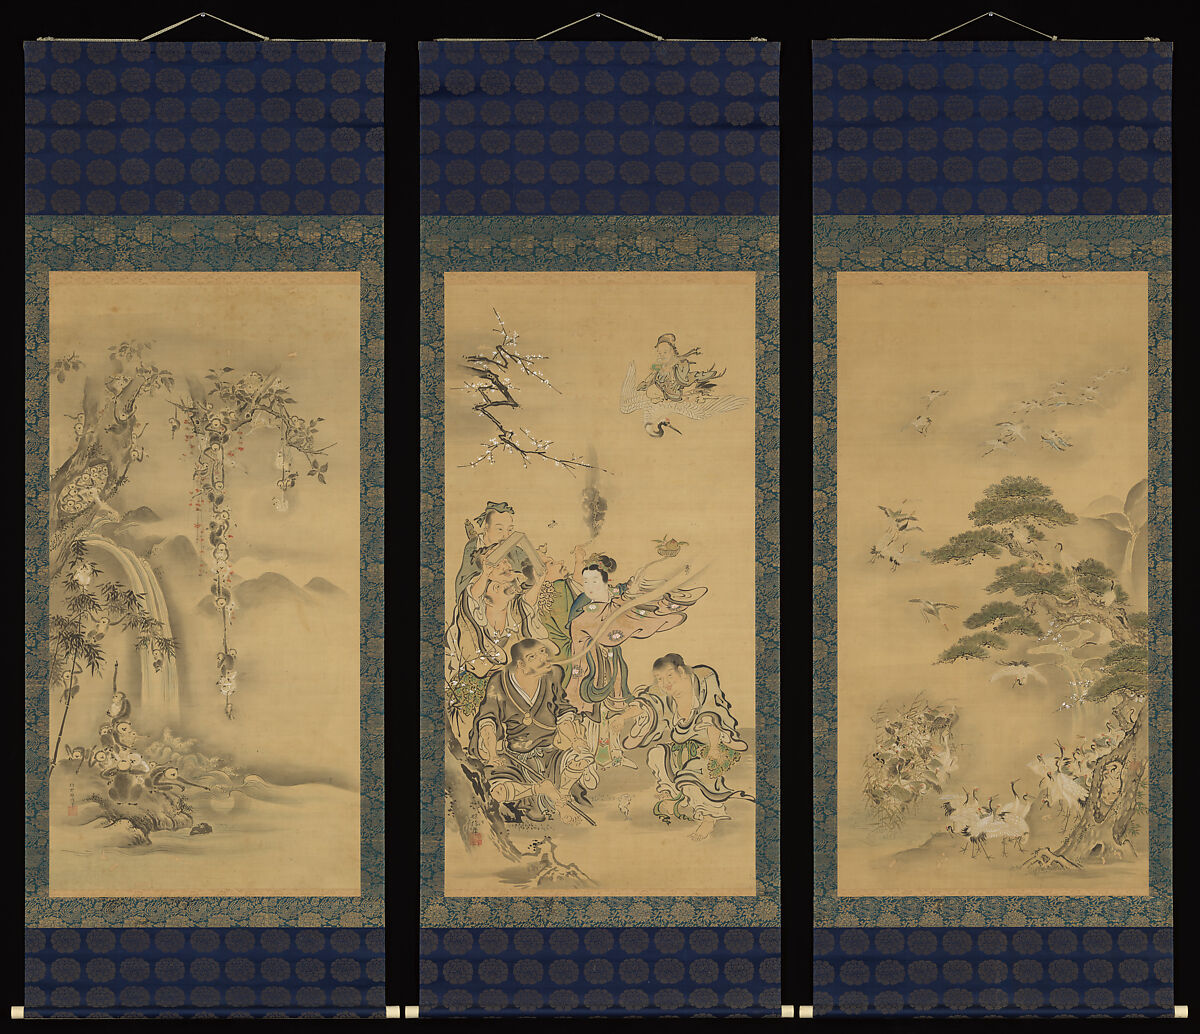 Eight Daoist Immortals, Cranes, and Gibbons, Kano Tanshin (Morimasa) (Japanese, 1653–1718), Triptych of hanging scrolls; ink and color on silk, Japan 